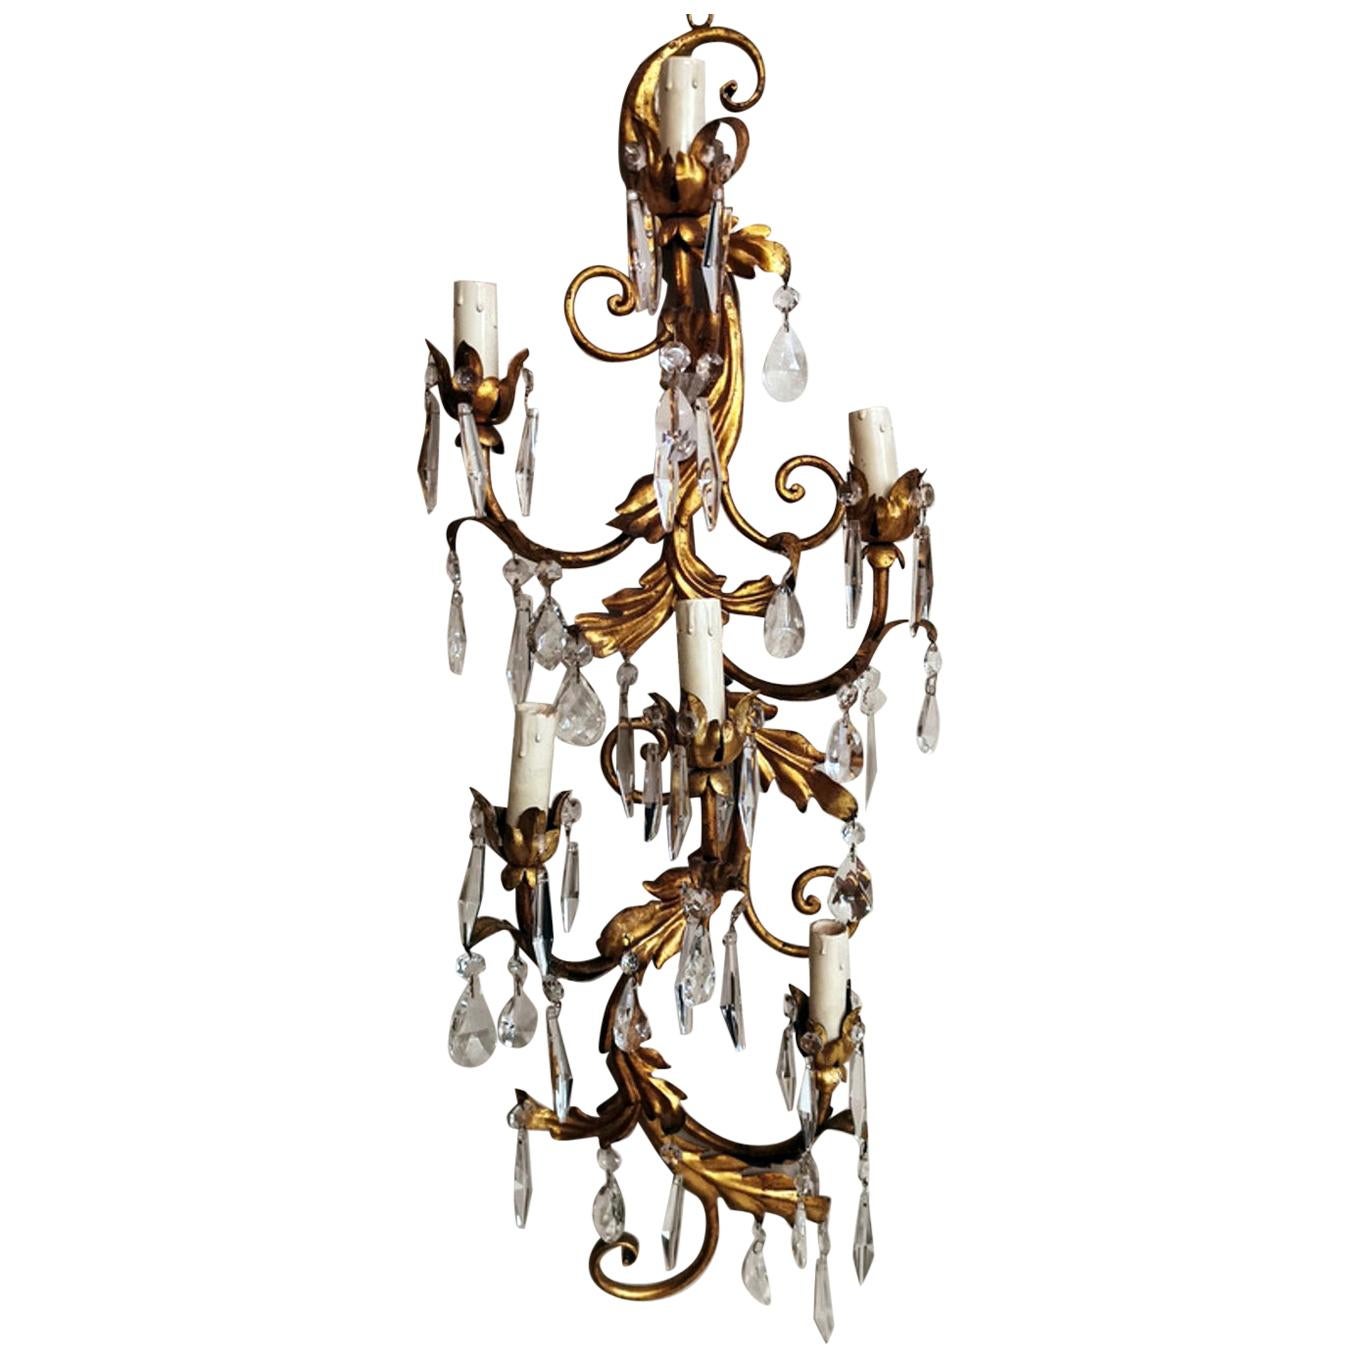 Rococo Style Florentine Wall Sconce in Gilded Iron and Crystals